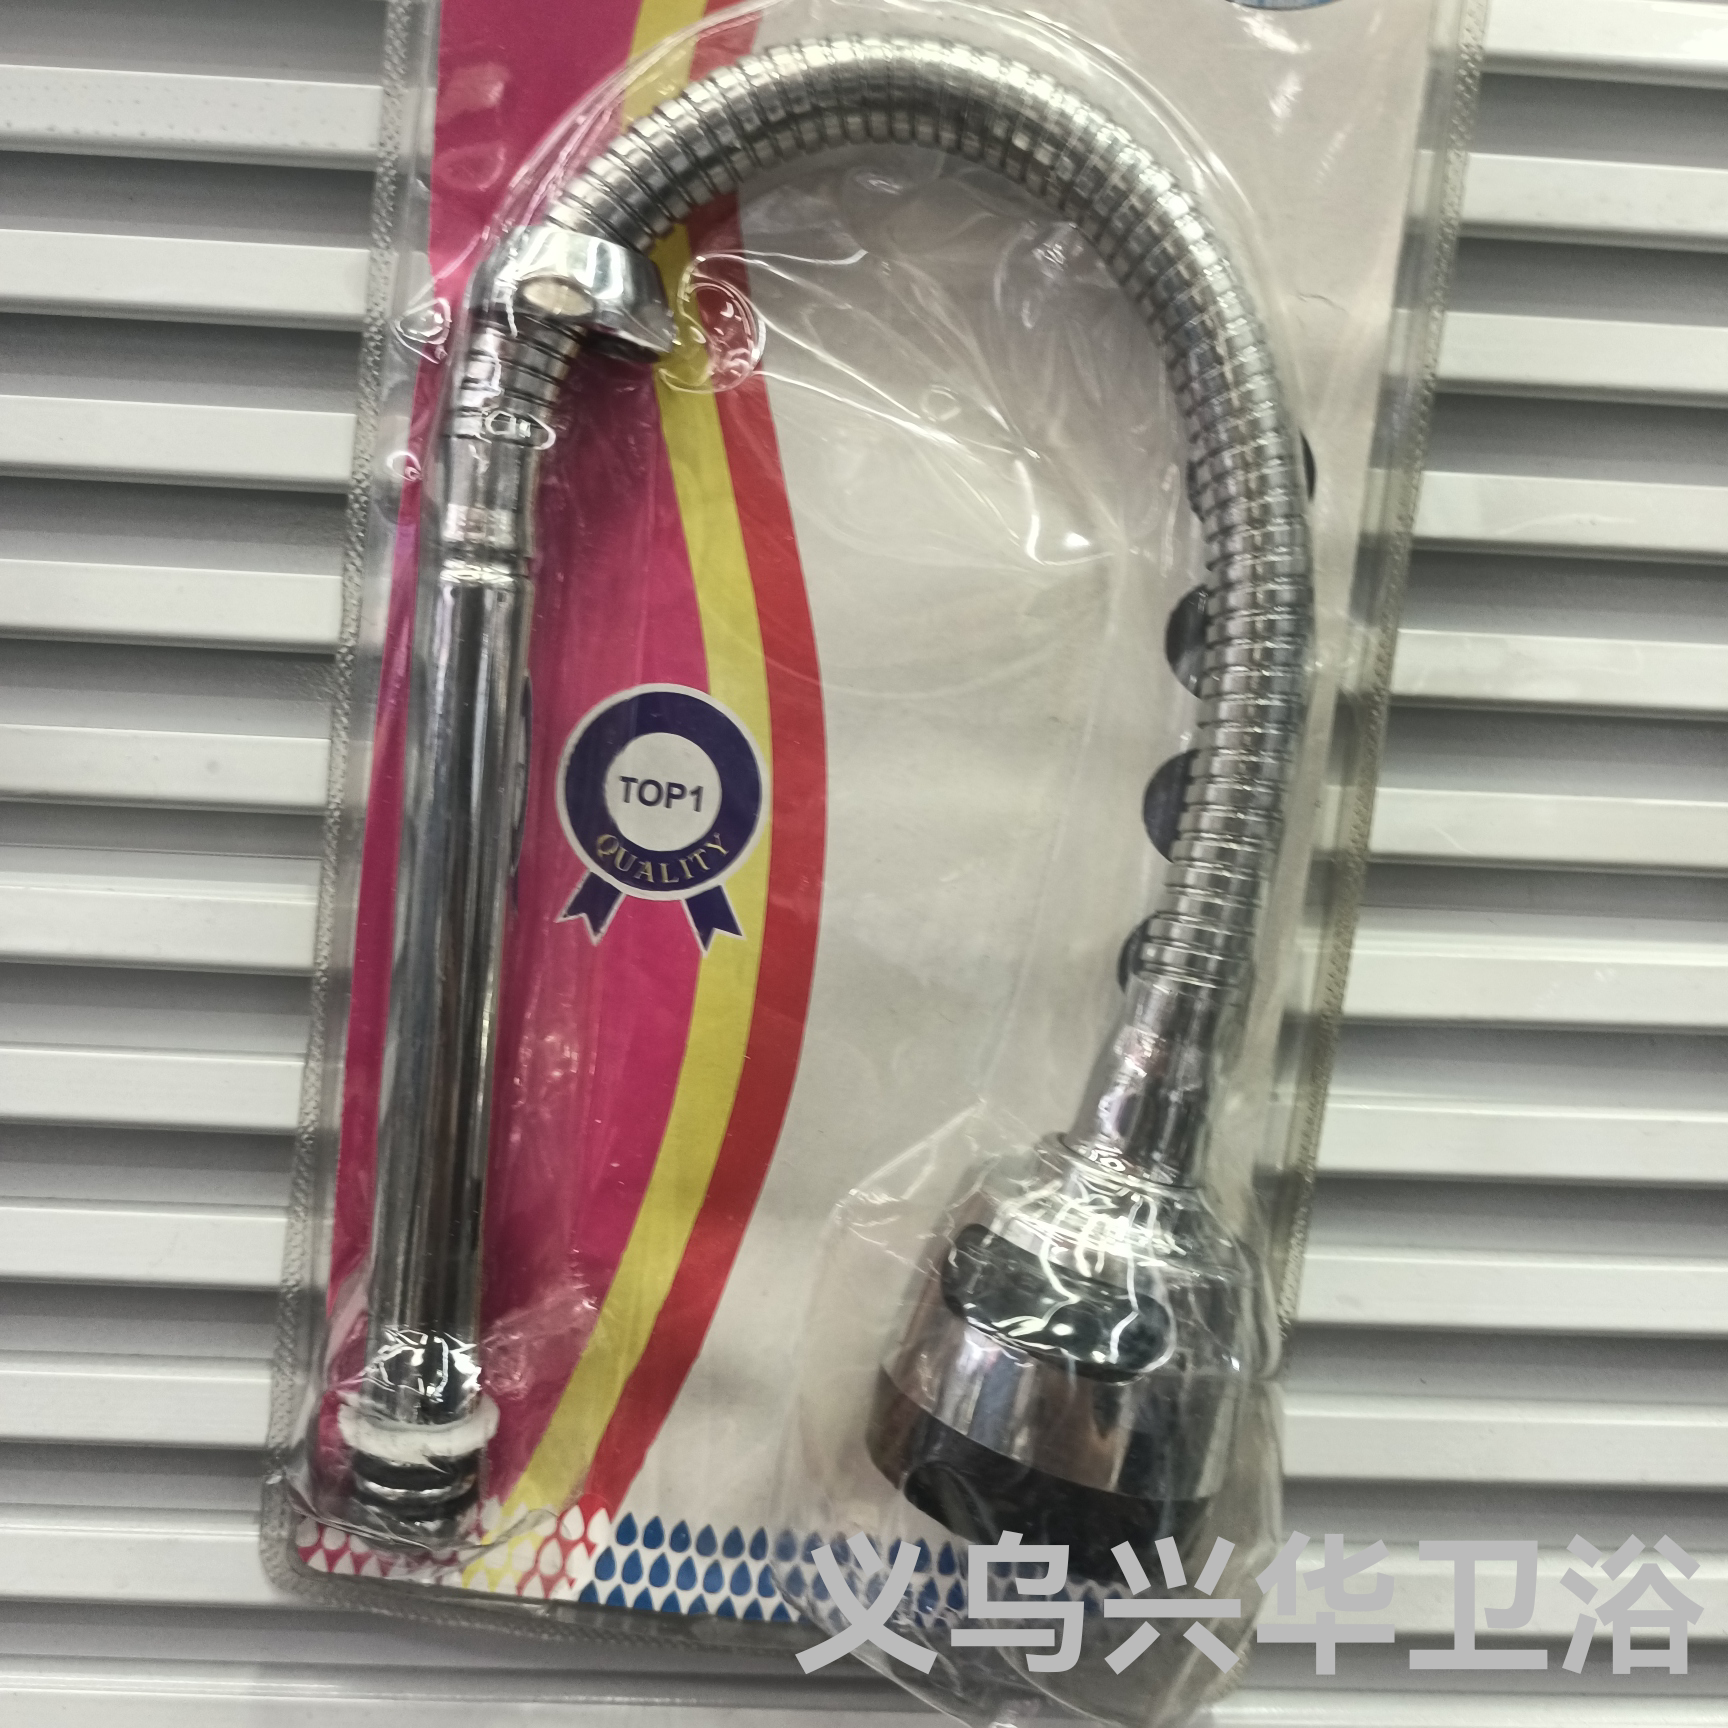 Universal Pipe Faucet Boutique Chuck Outer Packaging Wholesale